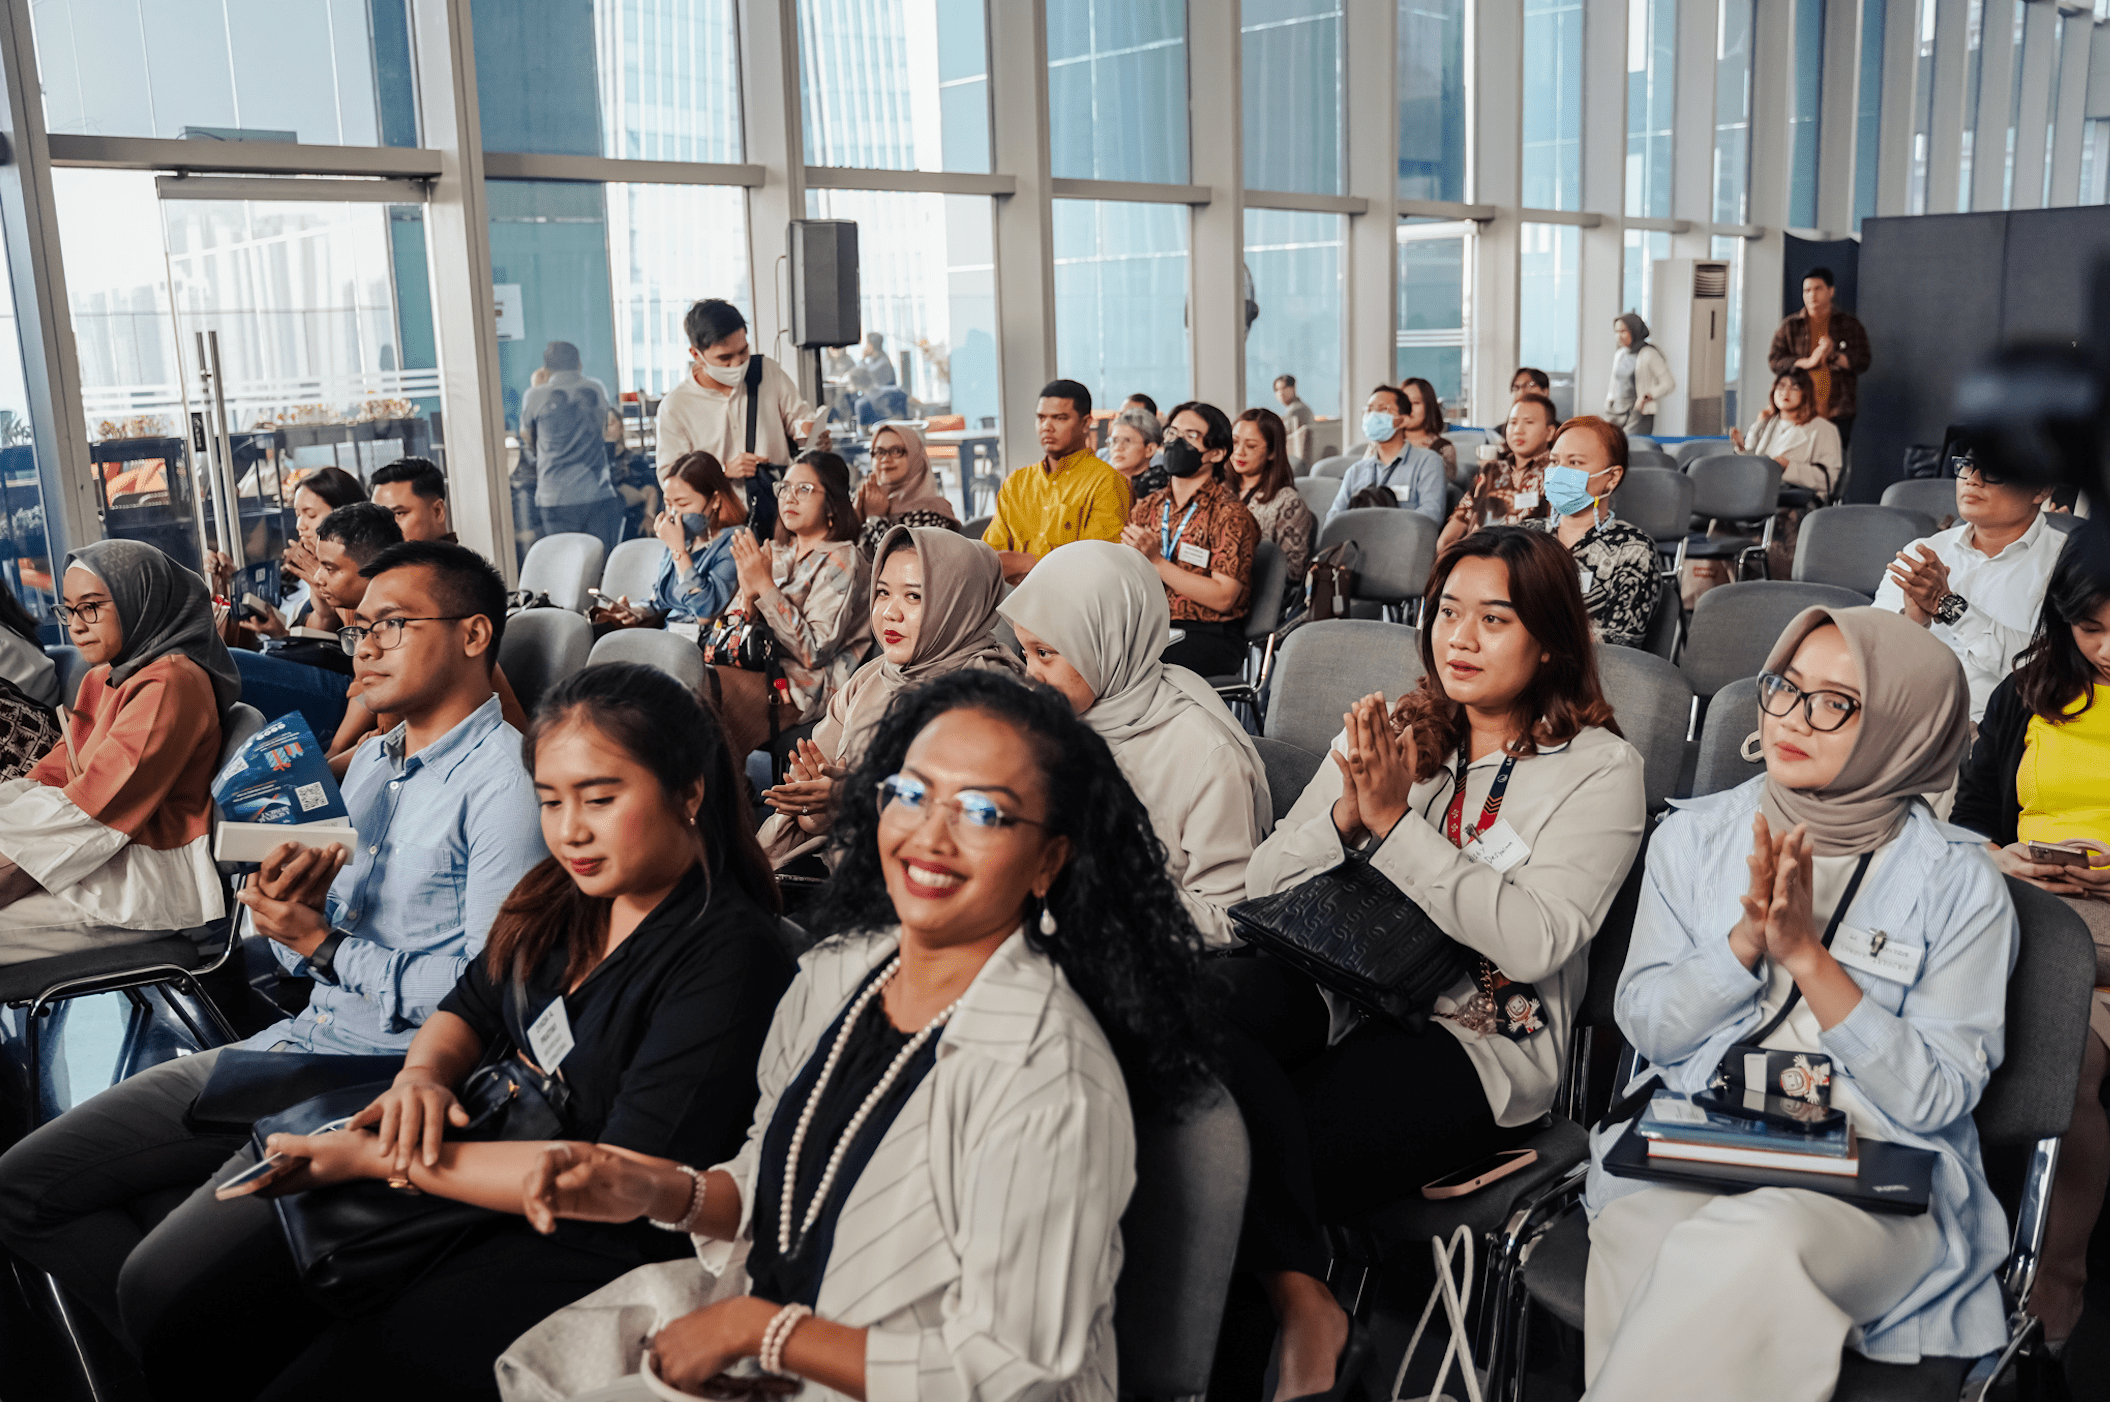 From Media Monitoring to Developing Impactful Content – Key takeaways from the Comms Connect Event in Indonesia